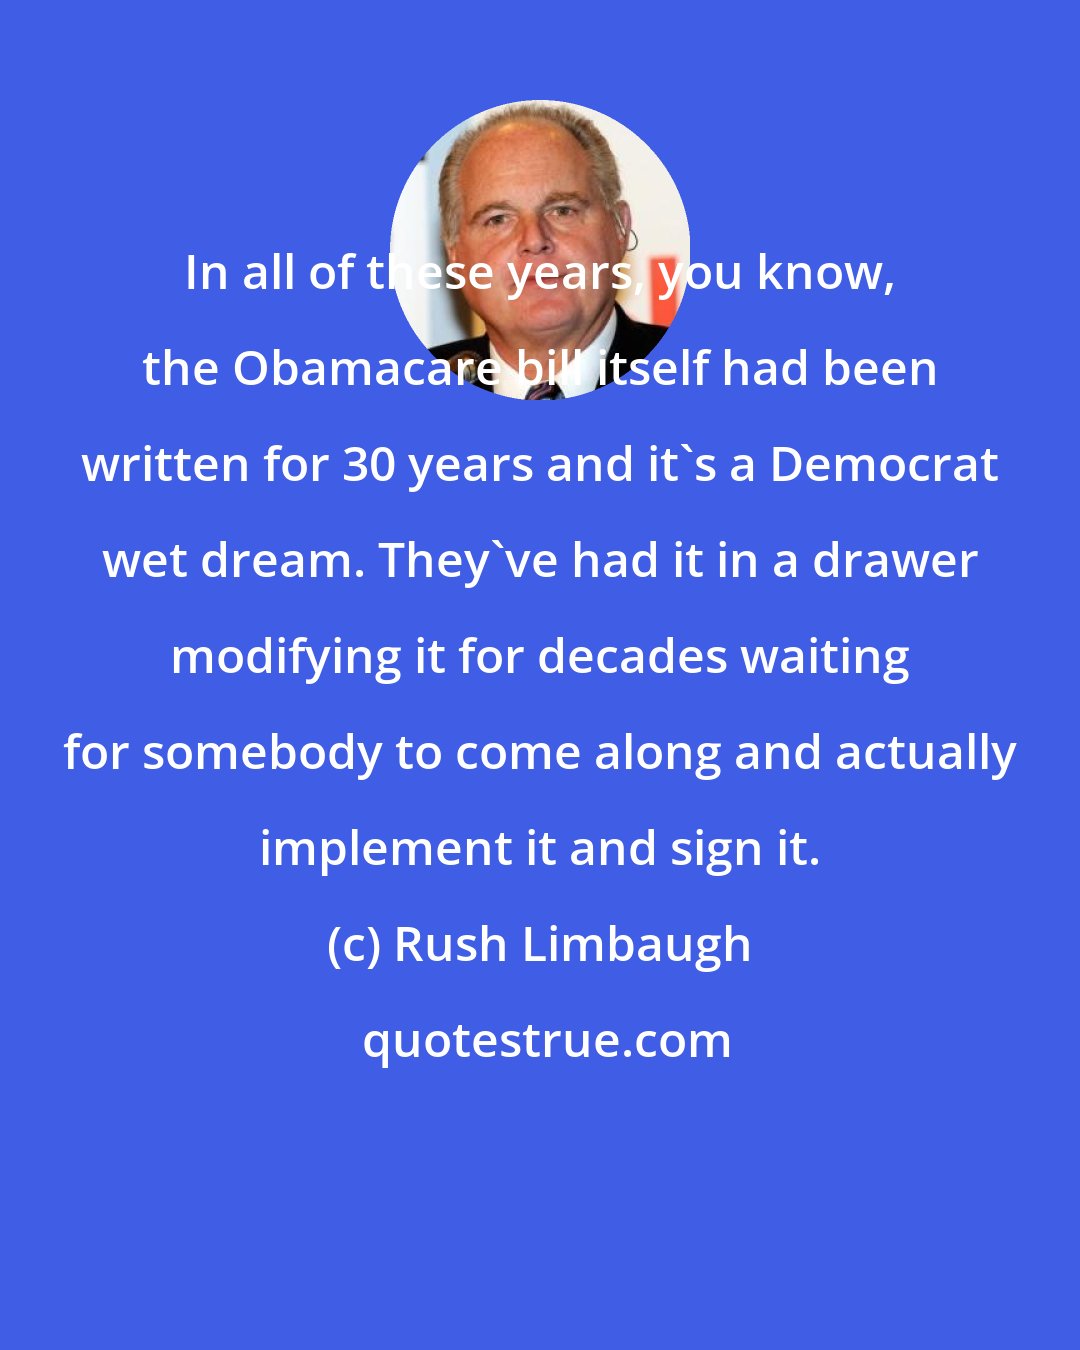 Rush Limbaugh: In all of these years, you know, the Obamacare bill itself had been written for 30 years and it's a Democrat wet dream. They've had it in a drawer modifying it for decades waiting for somebody to come along and actually implement it and sign it.